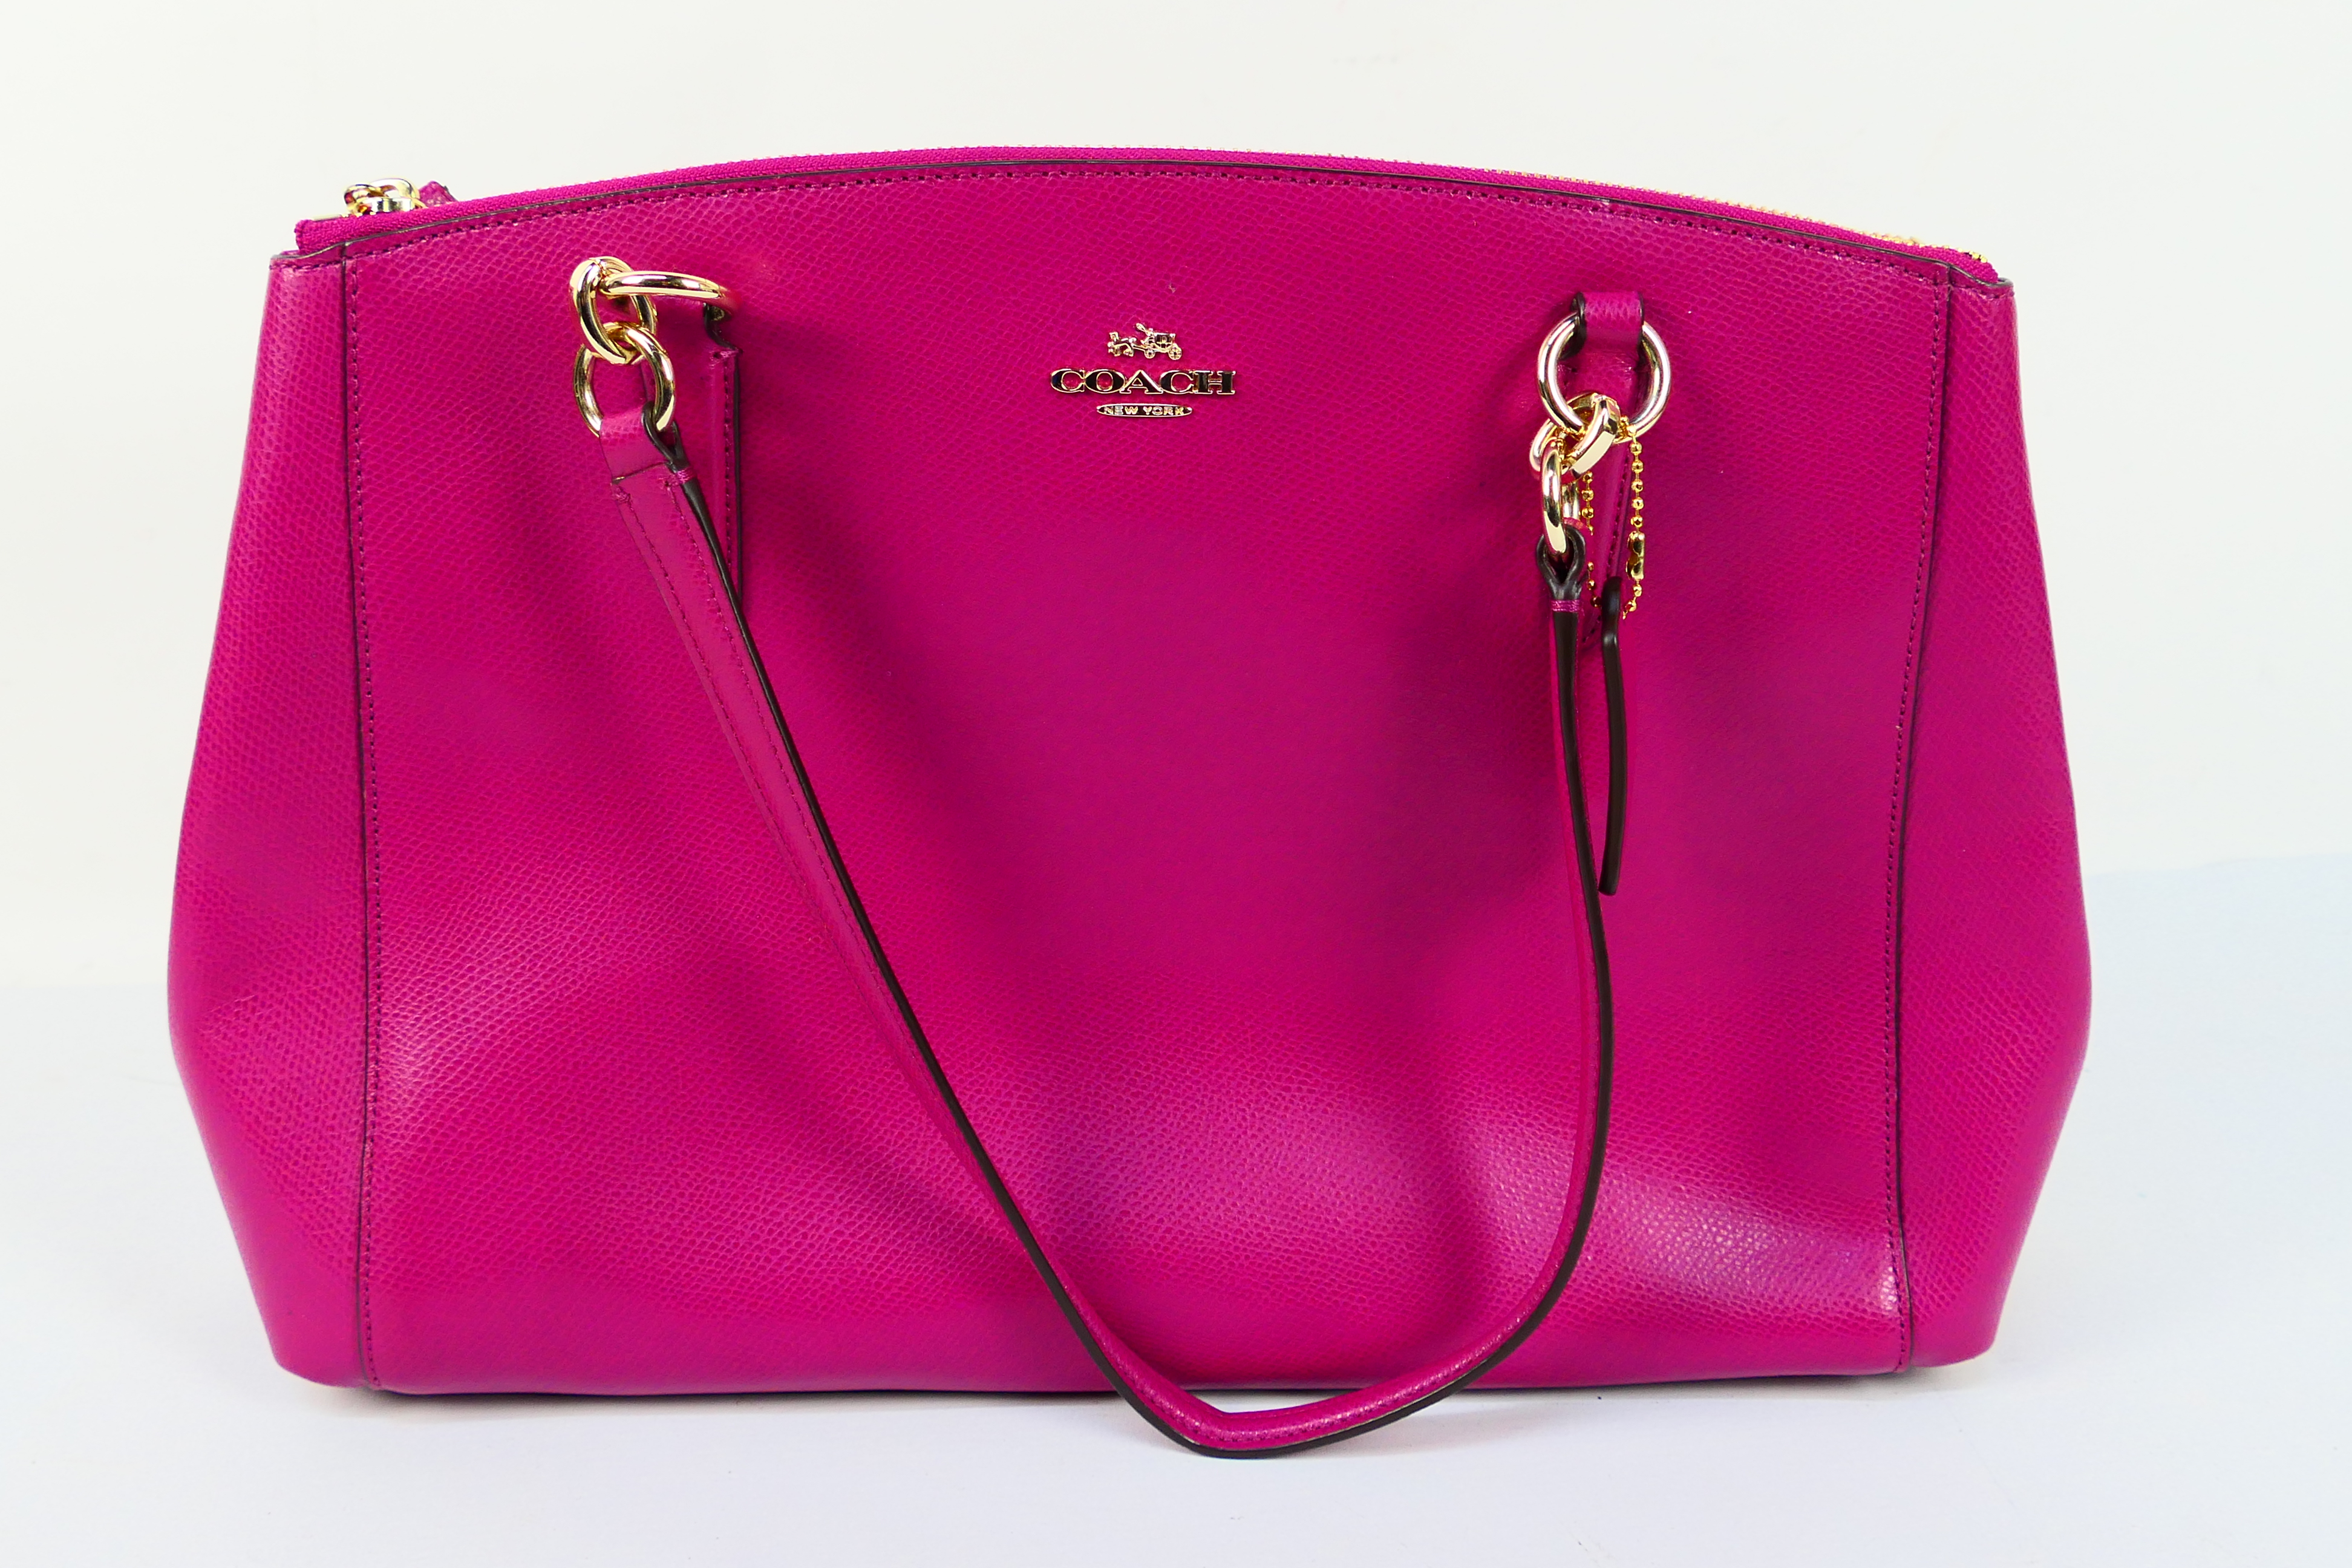 Coach New York - a Cerise Pink Coach handbag, labelled with makers mark,